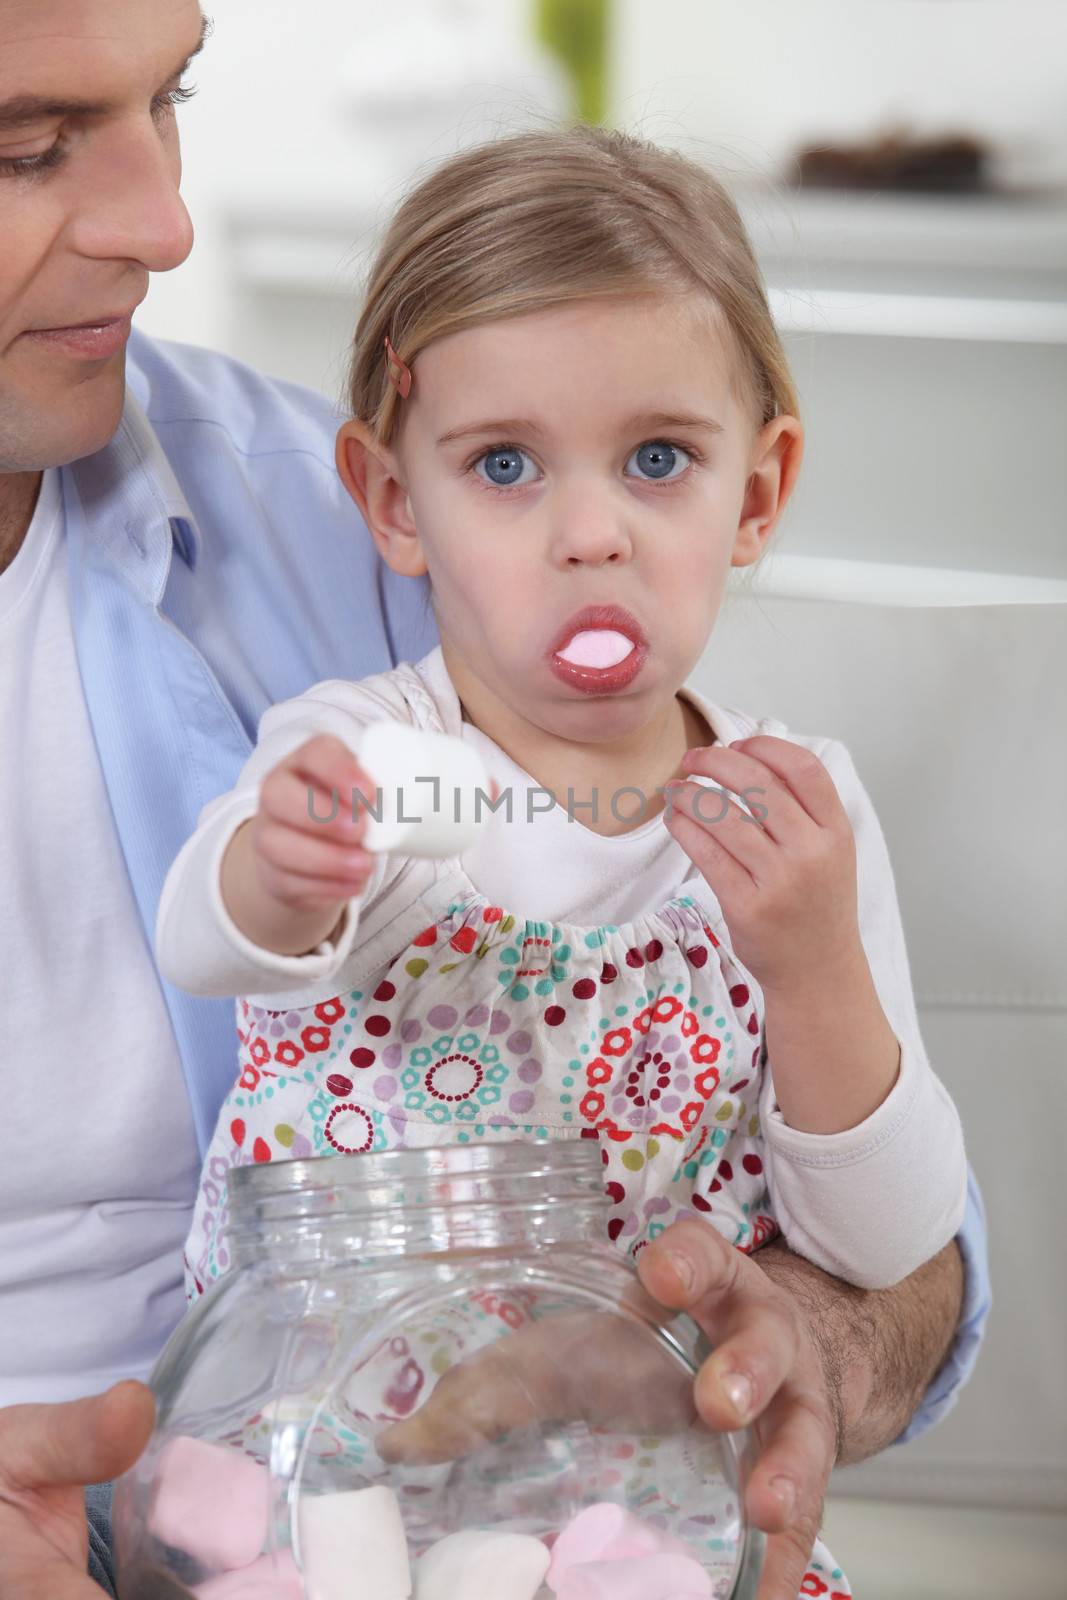 Little girl eating candy